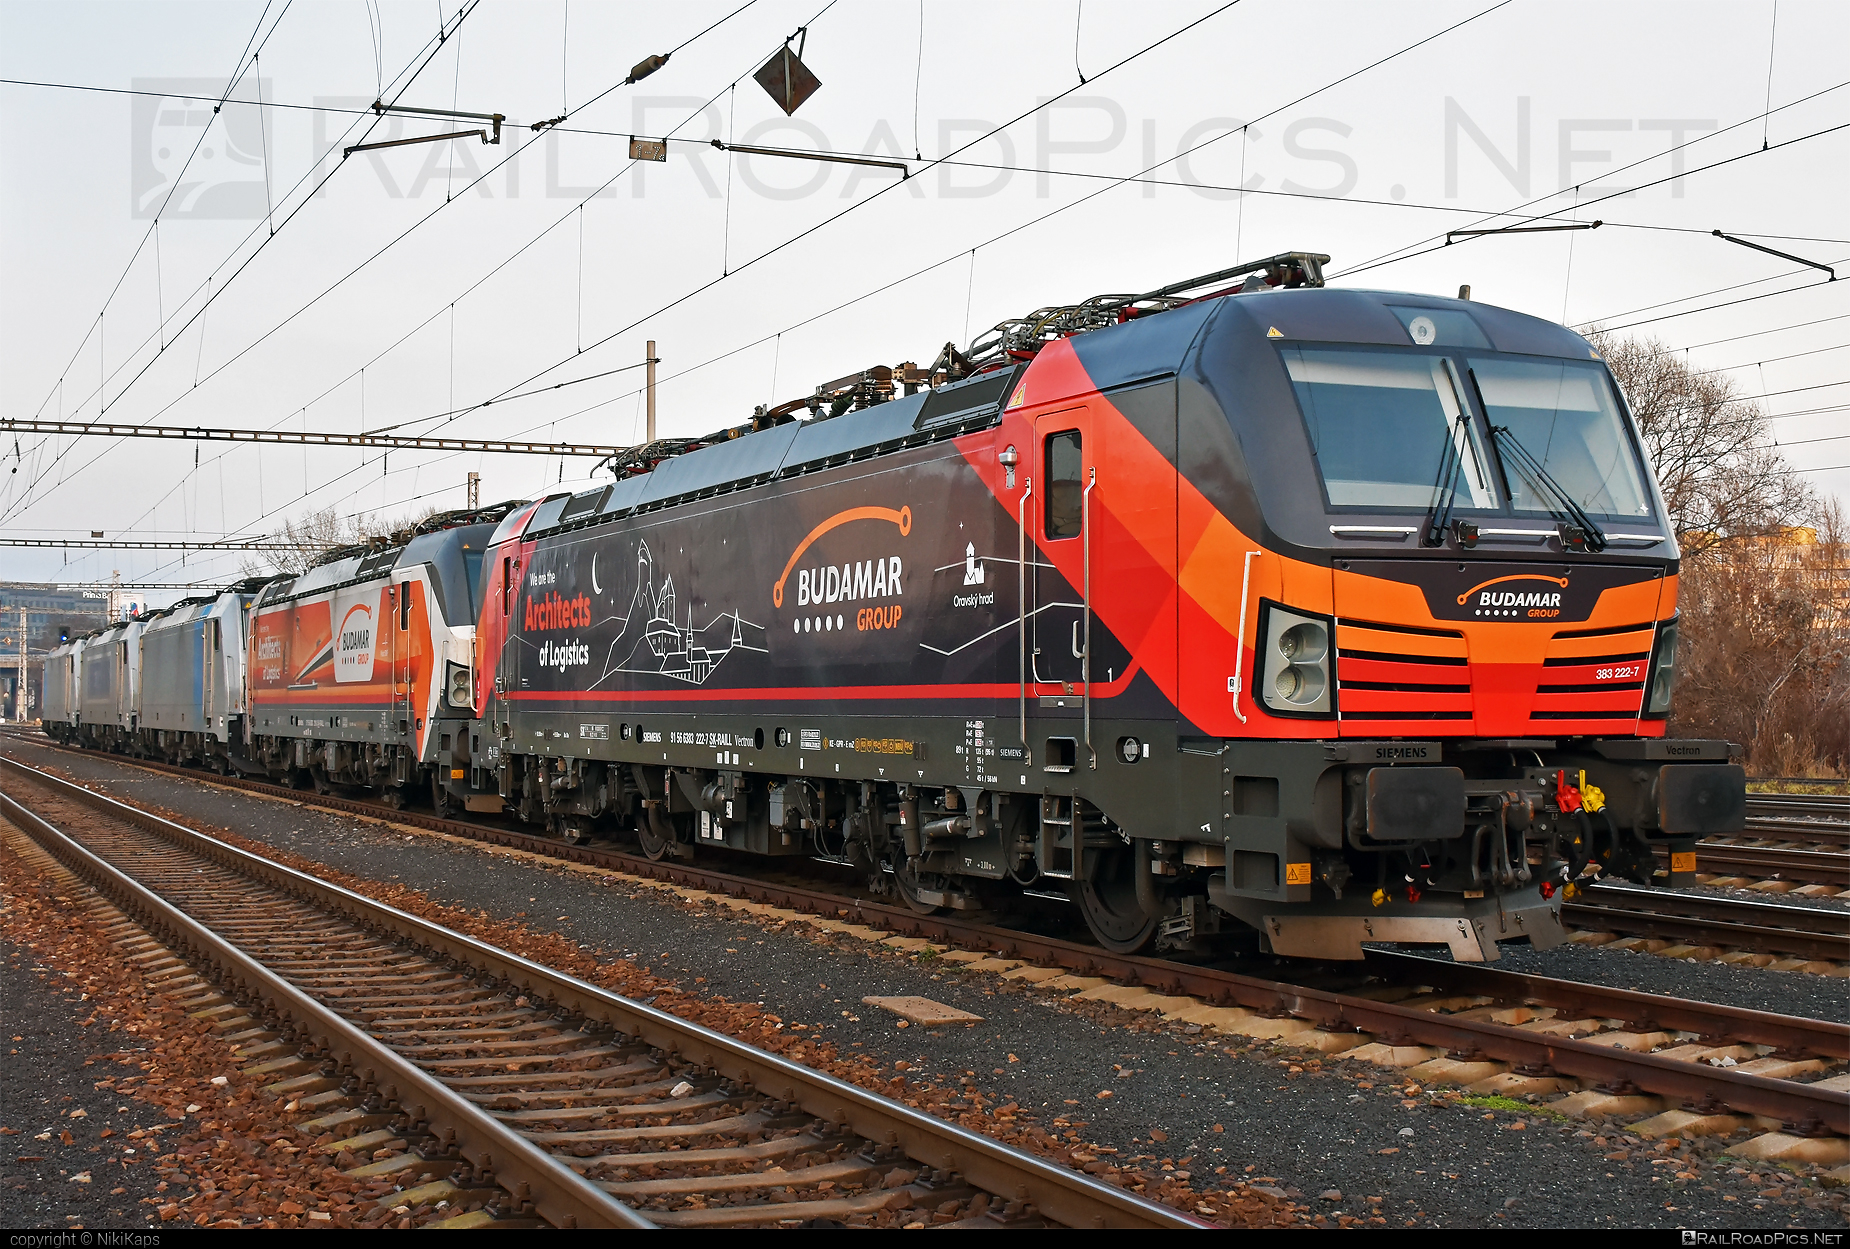 Siemens Vectron MS - 383 222-7 operated by LOKORAIL, a.s. #RollingStockLease #RollingStockLeaseSro #budamar #lokorail #lrl #raill #siemens #siemensVectron #siemensVectronMS #vectron #vectronMS